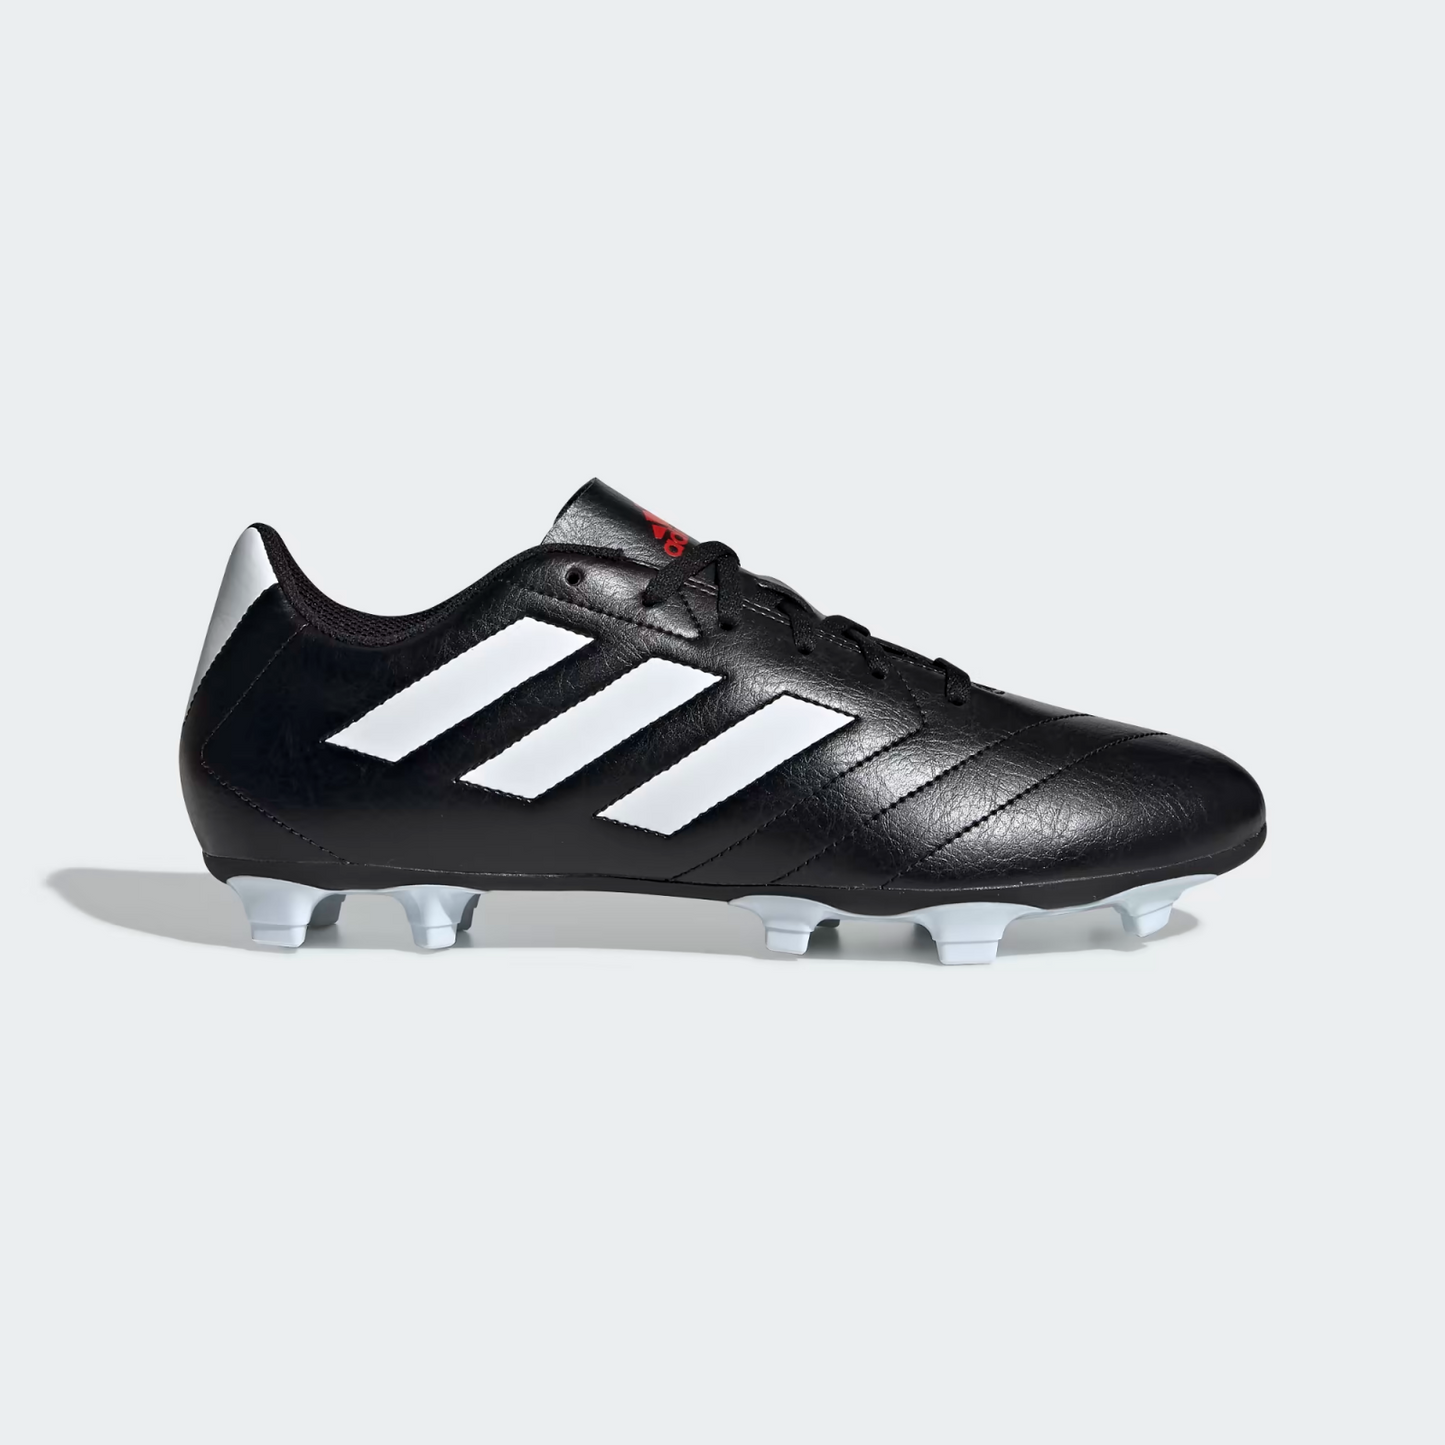 adidas Goletto VII FG Mens Football Boots Black SIZE 9 Firm Ground Moulded